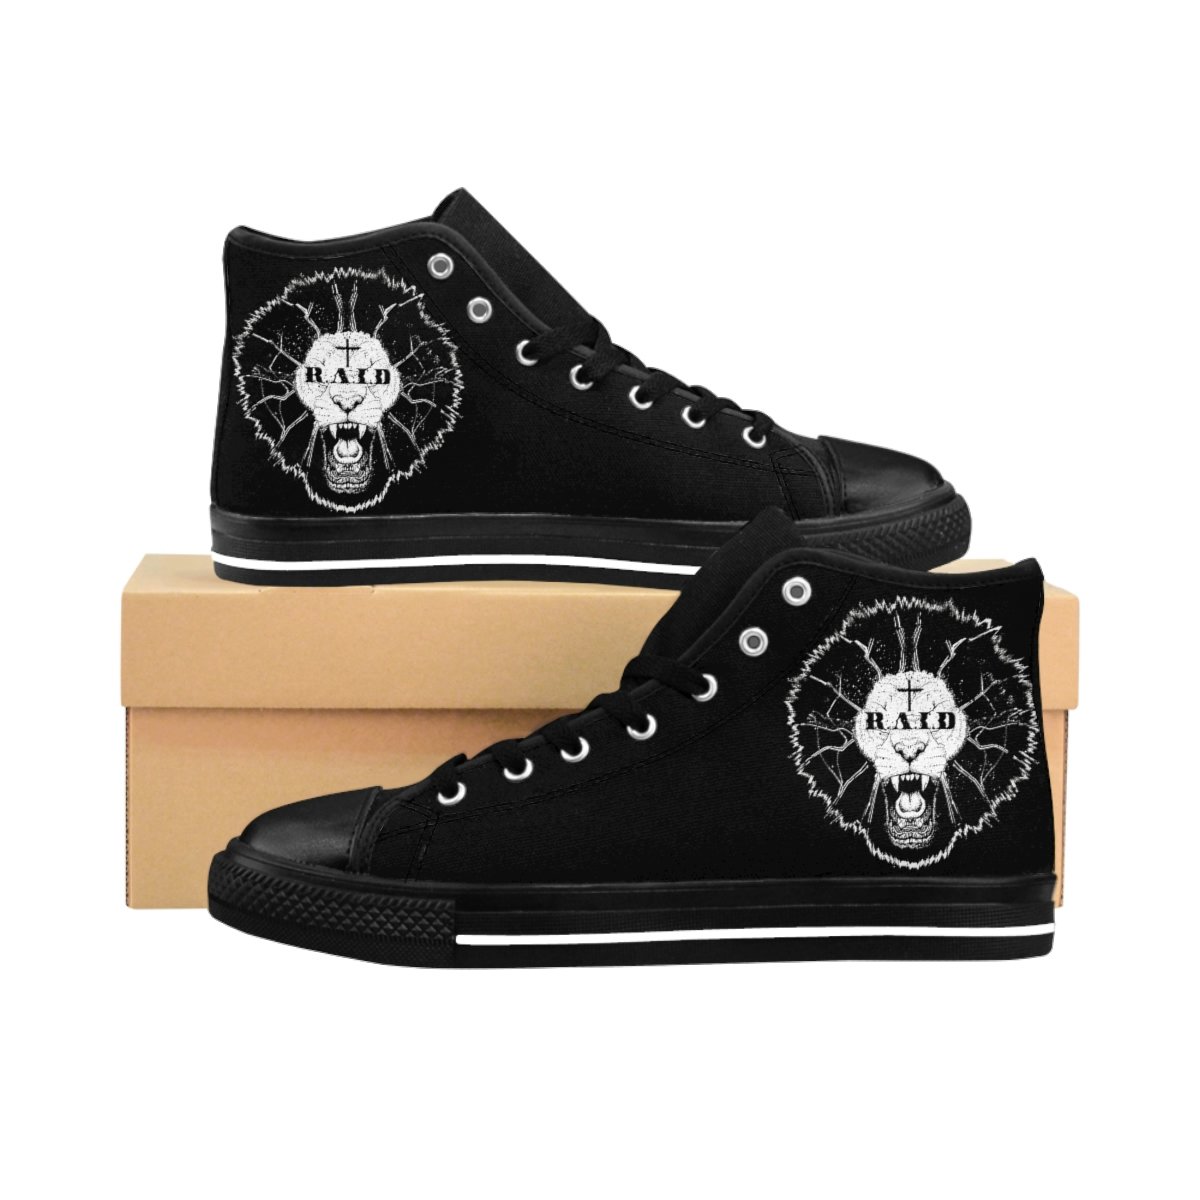 R.A.I.D Lion Women’s High-top Sneakers